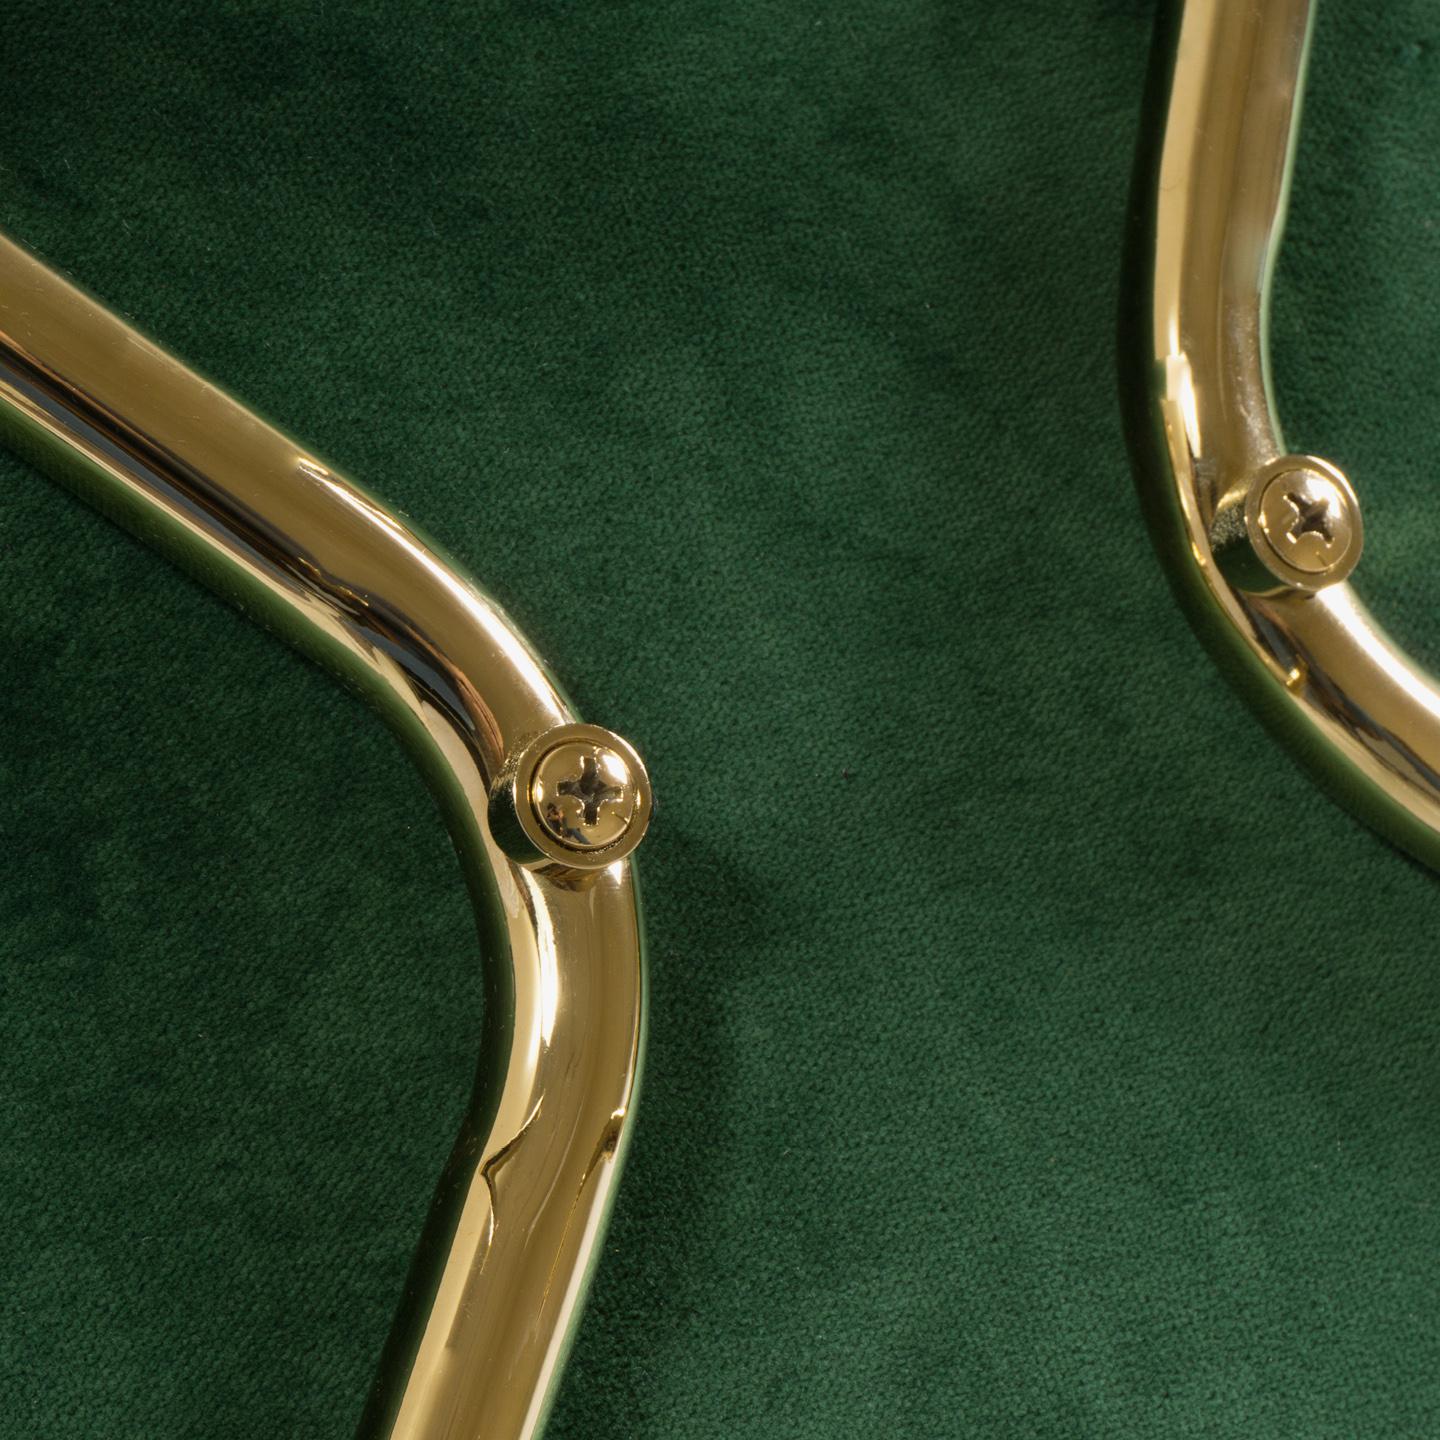 American Saarinen Executive Armless Chairs in Emerald Velvet, Gold Edition, Set of 6 For Sale